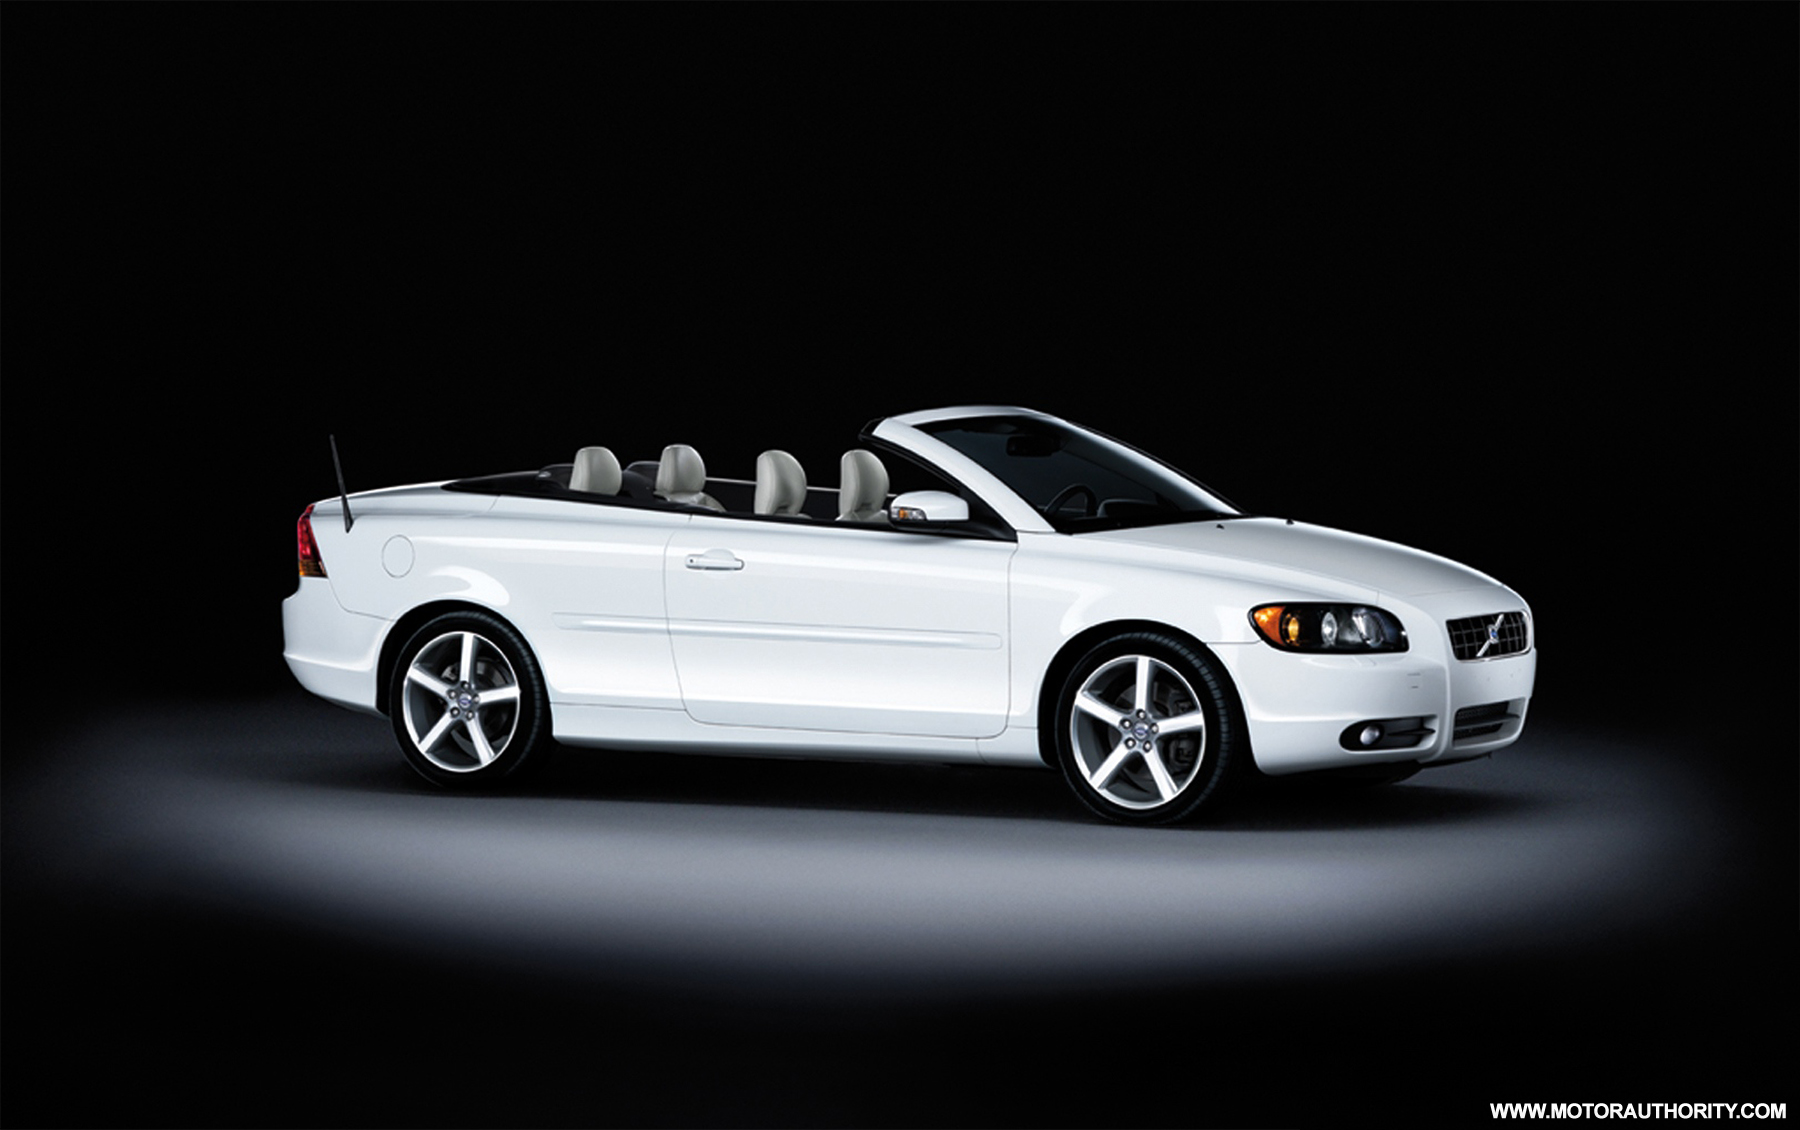 Ice White' C70: Volvo unveils a new special edition